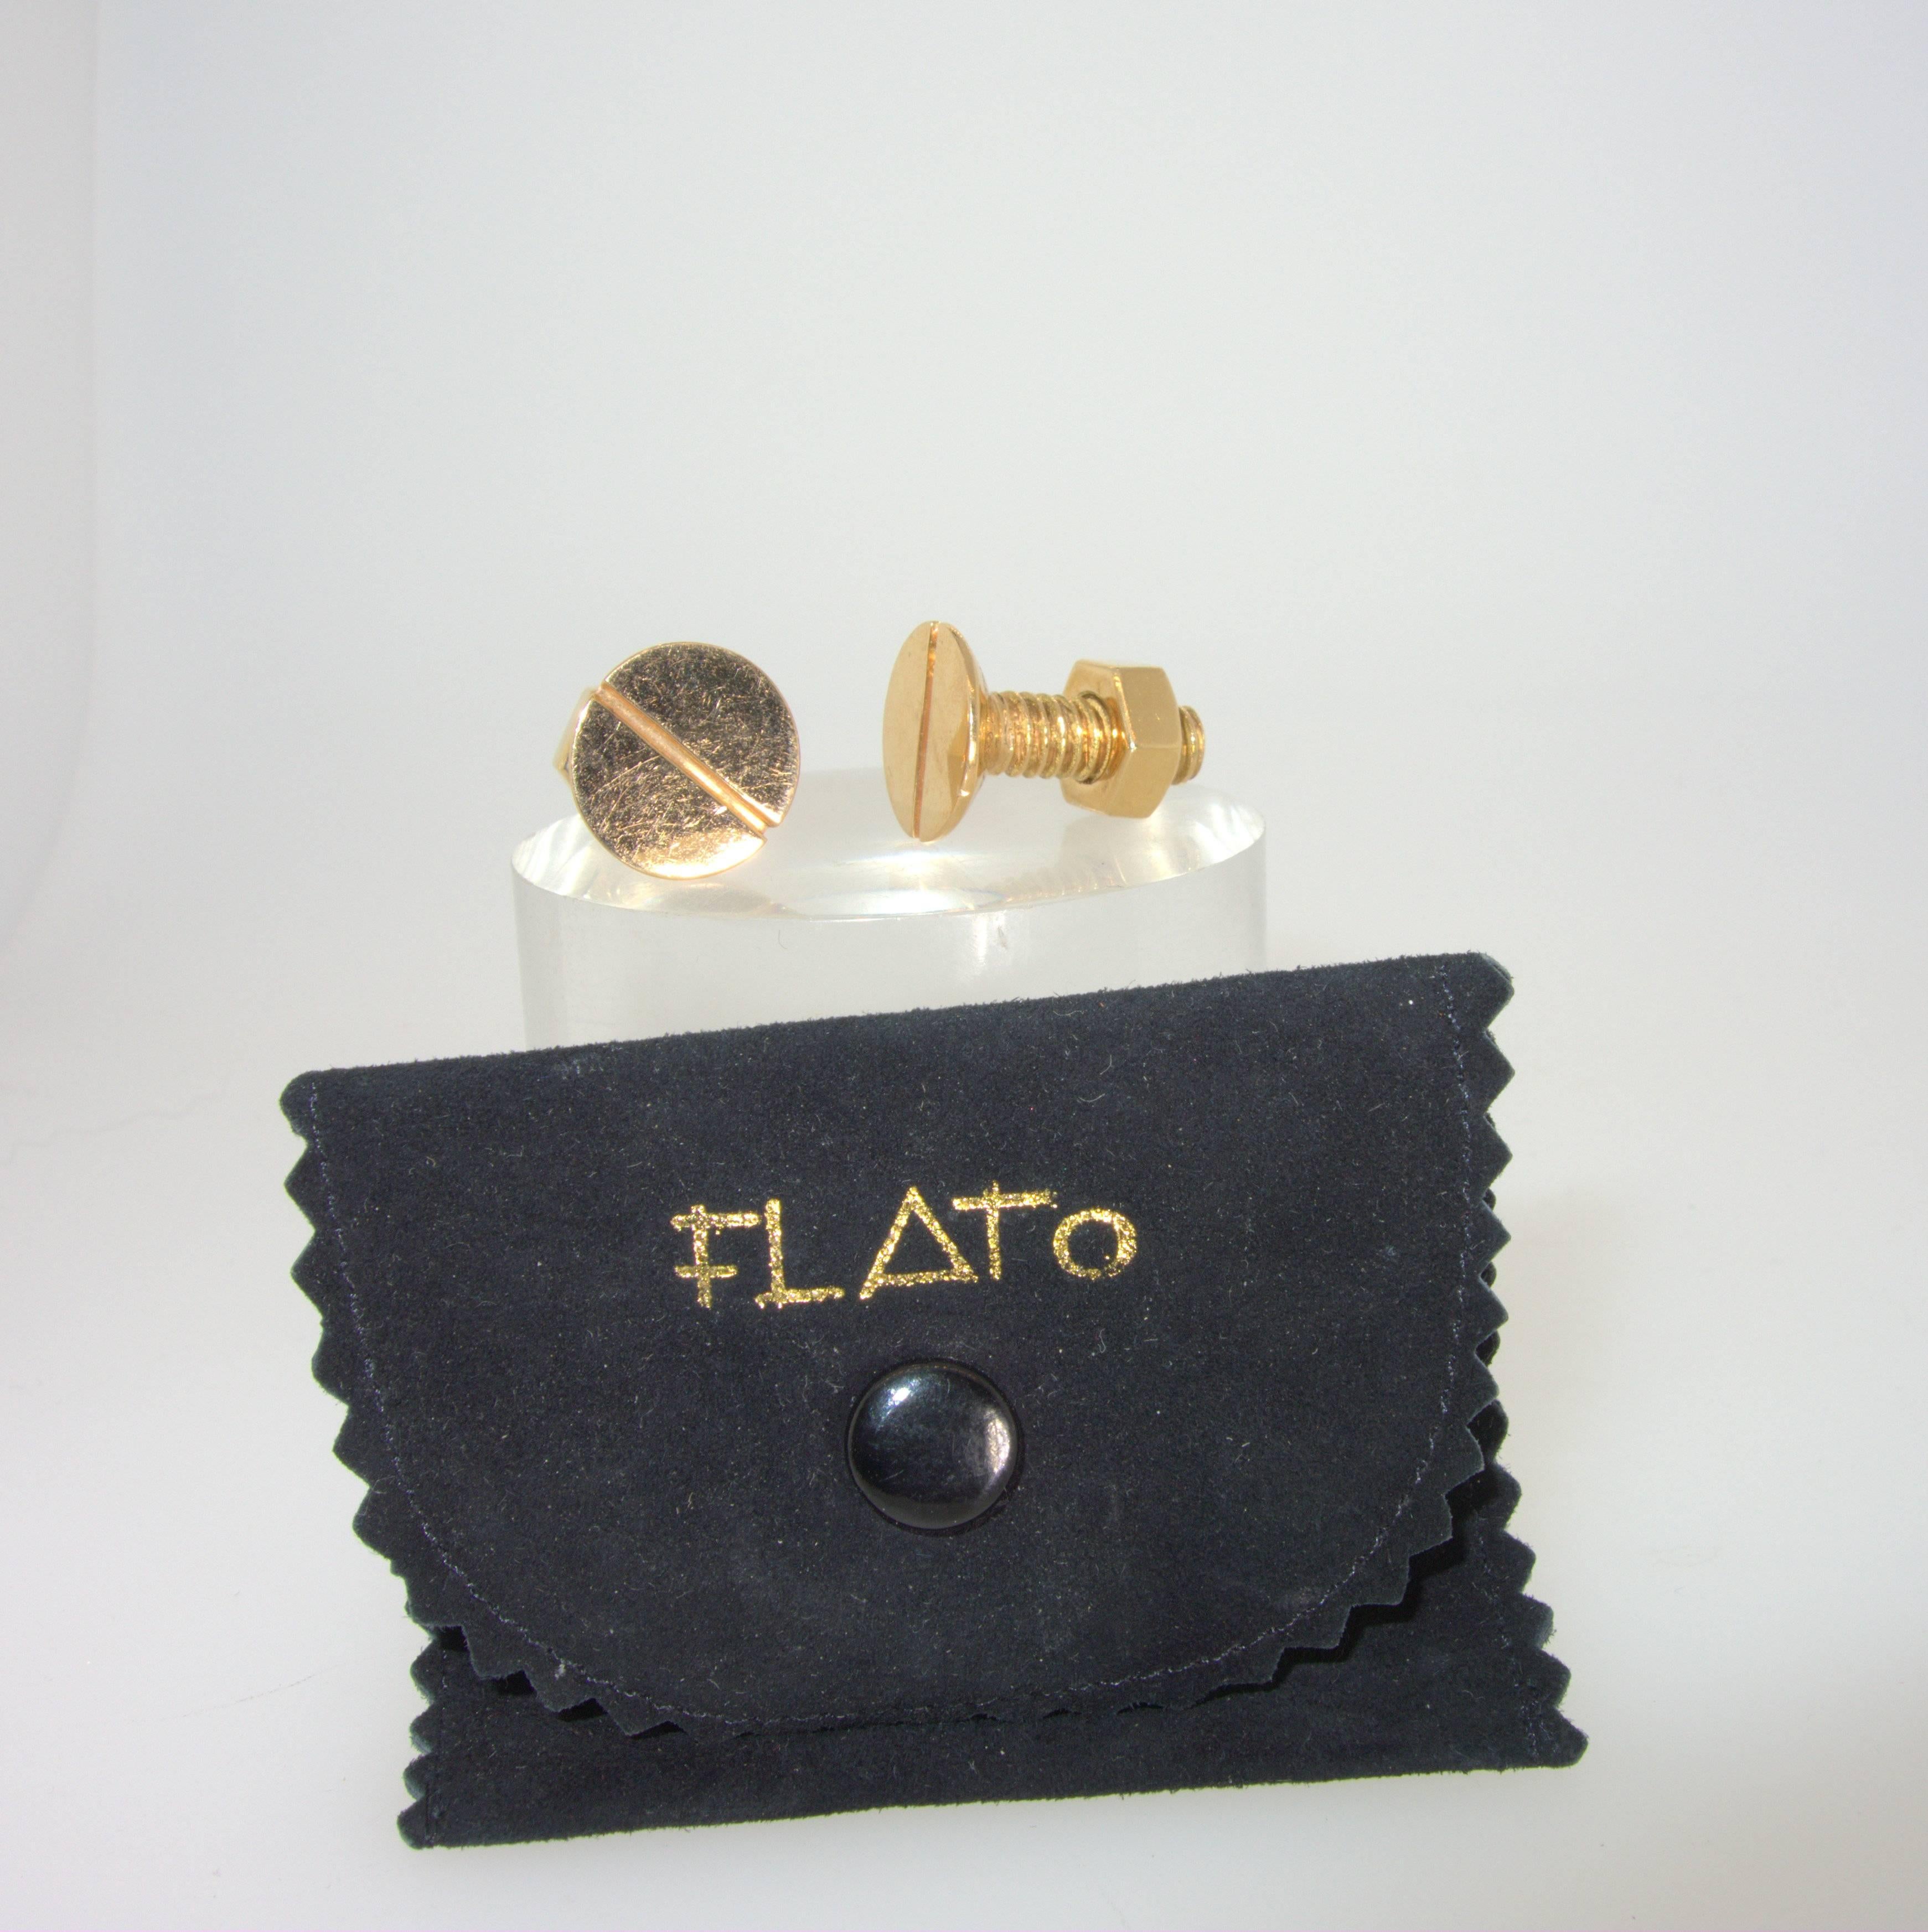 As seen in  Masterpieces of American Jewelry, this 18K yellow gold nut and bolts cuff-links (the screw un-screws when putting  on) was made by the  highly collected American designer Paul Flato in the mid 20th century.  As the story goes, Paul Flato